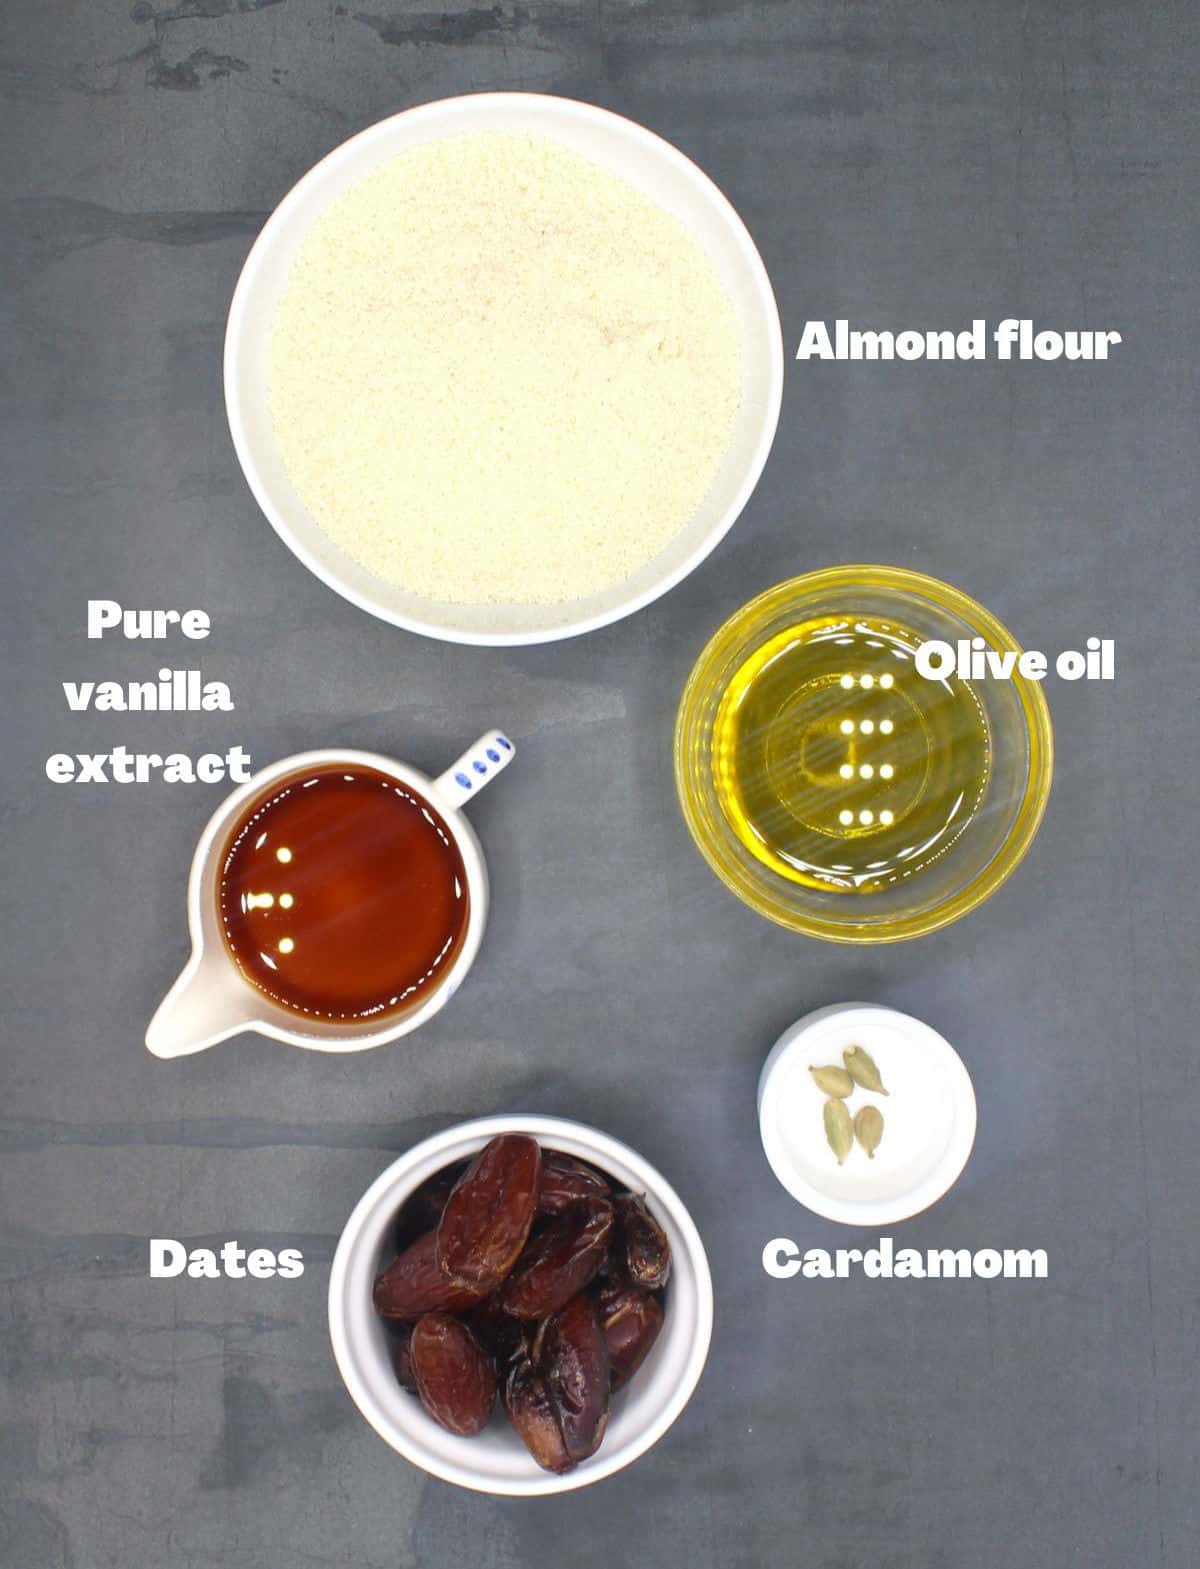 Ingredients for vegan almond flour cookies, including almond flour, vanilla, oil, dates and cardamom.